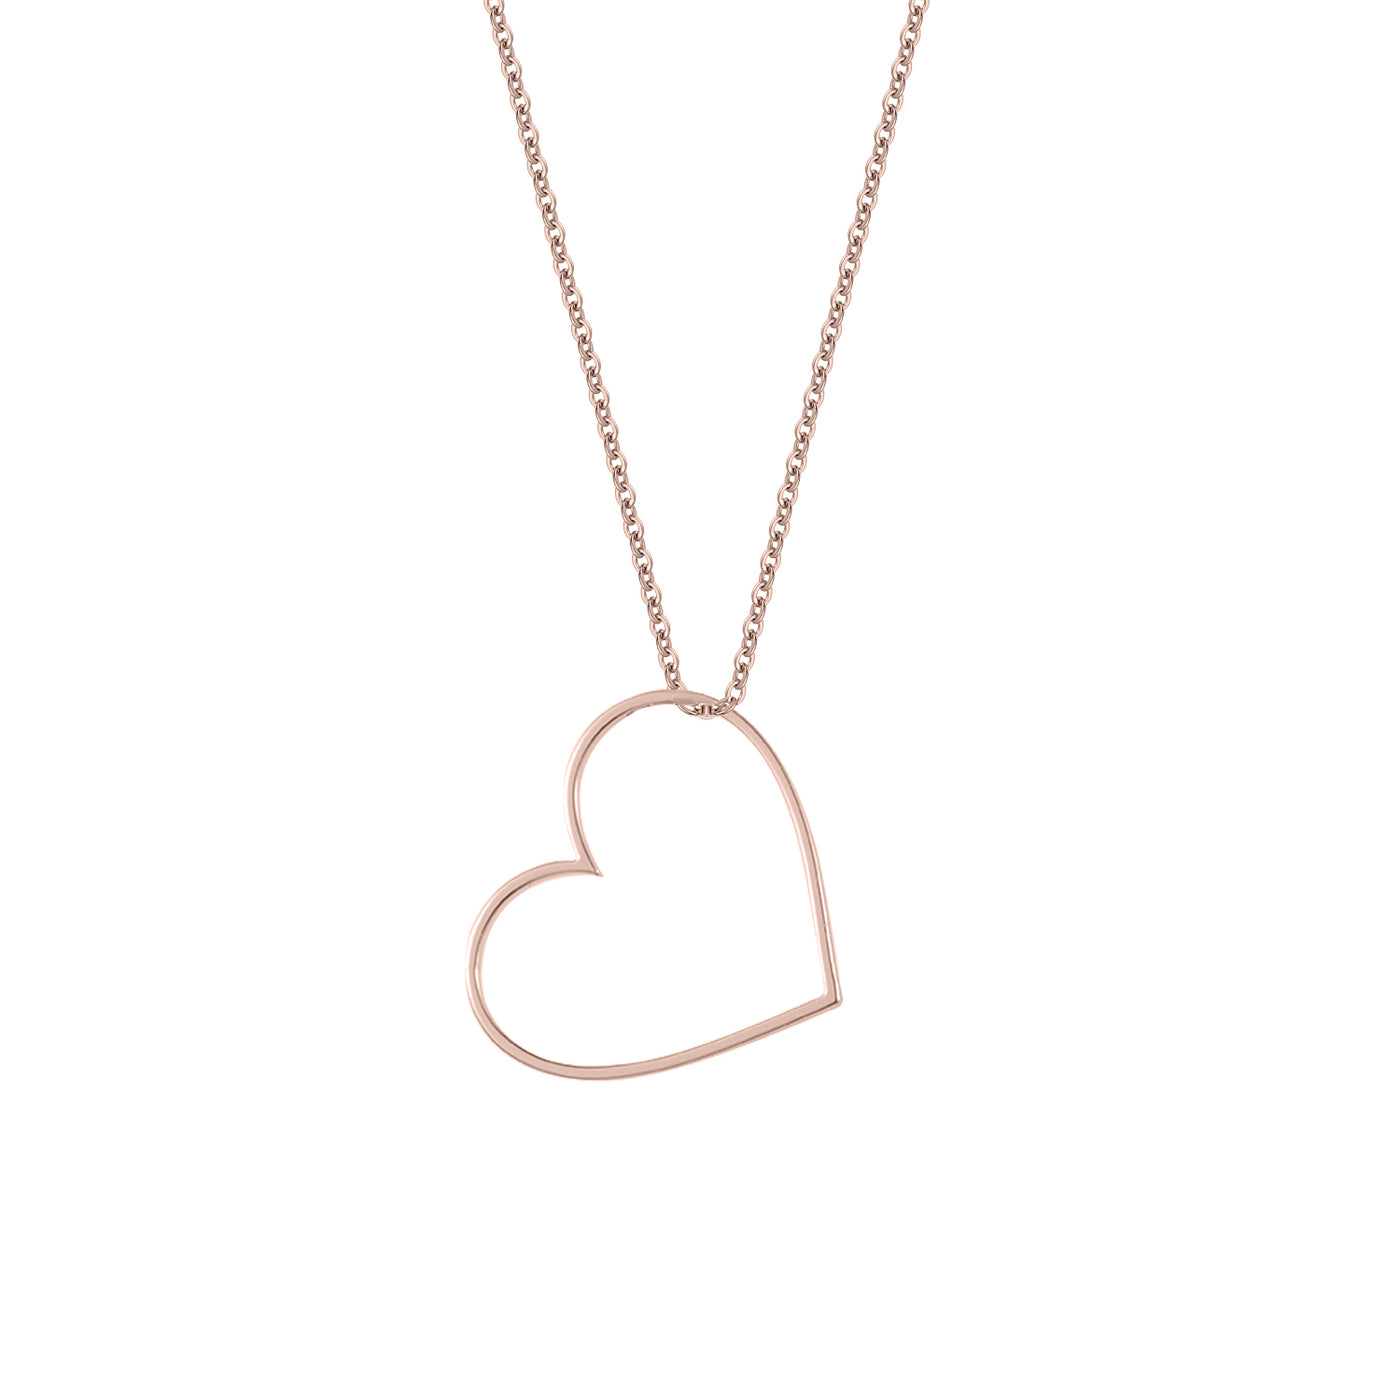 Collier Coeur Amour